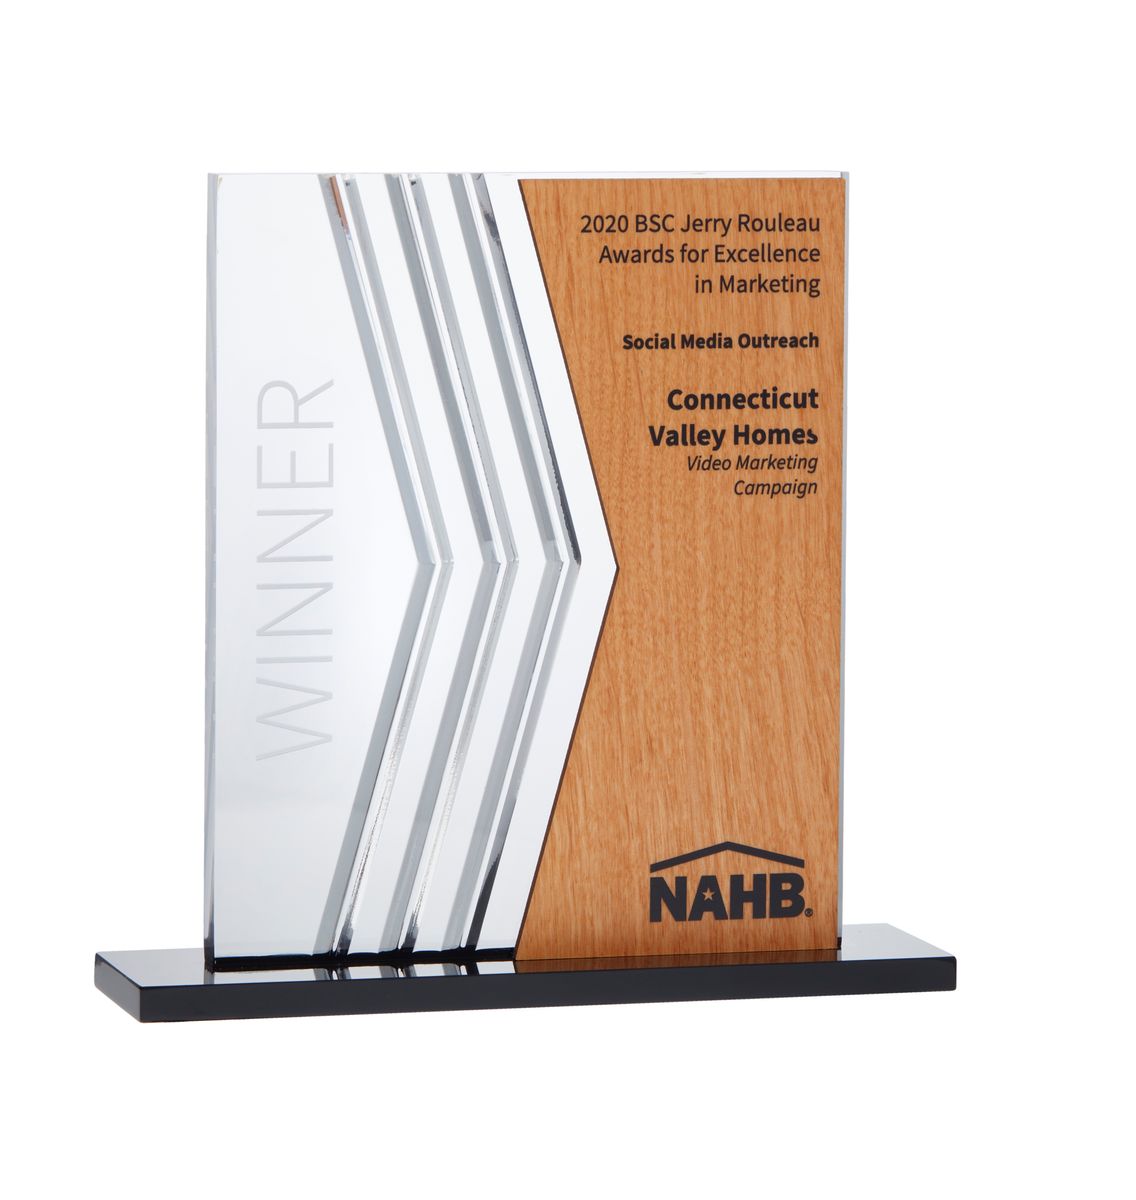 National Association of Home Builders Building Systems Council Jerry Rouleau Award for Marketing